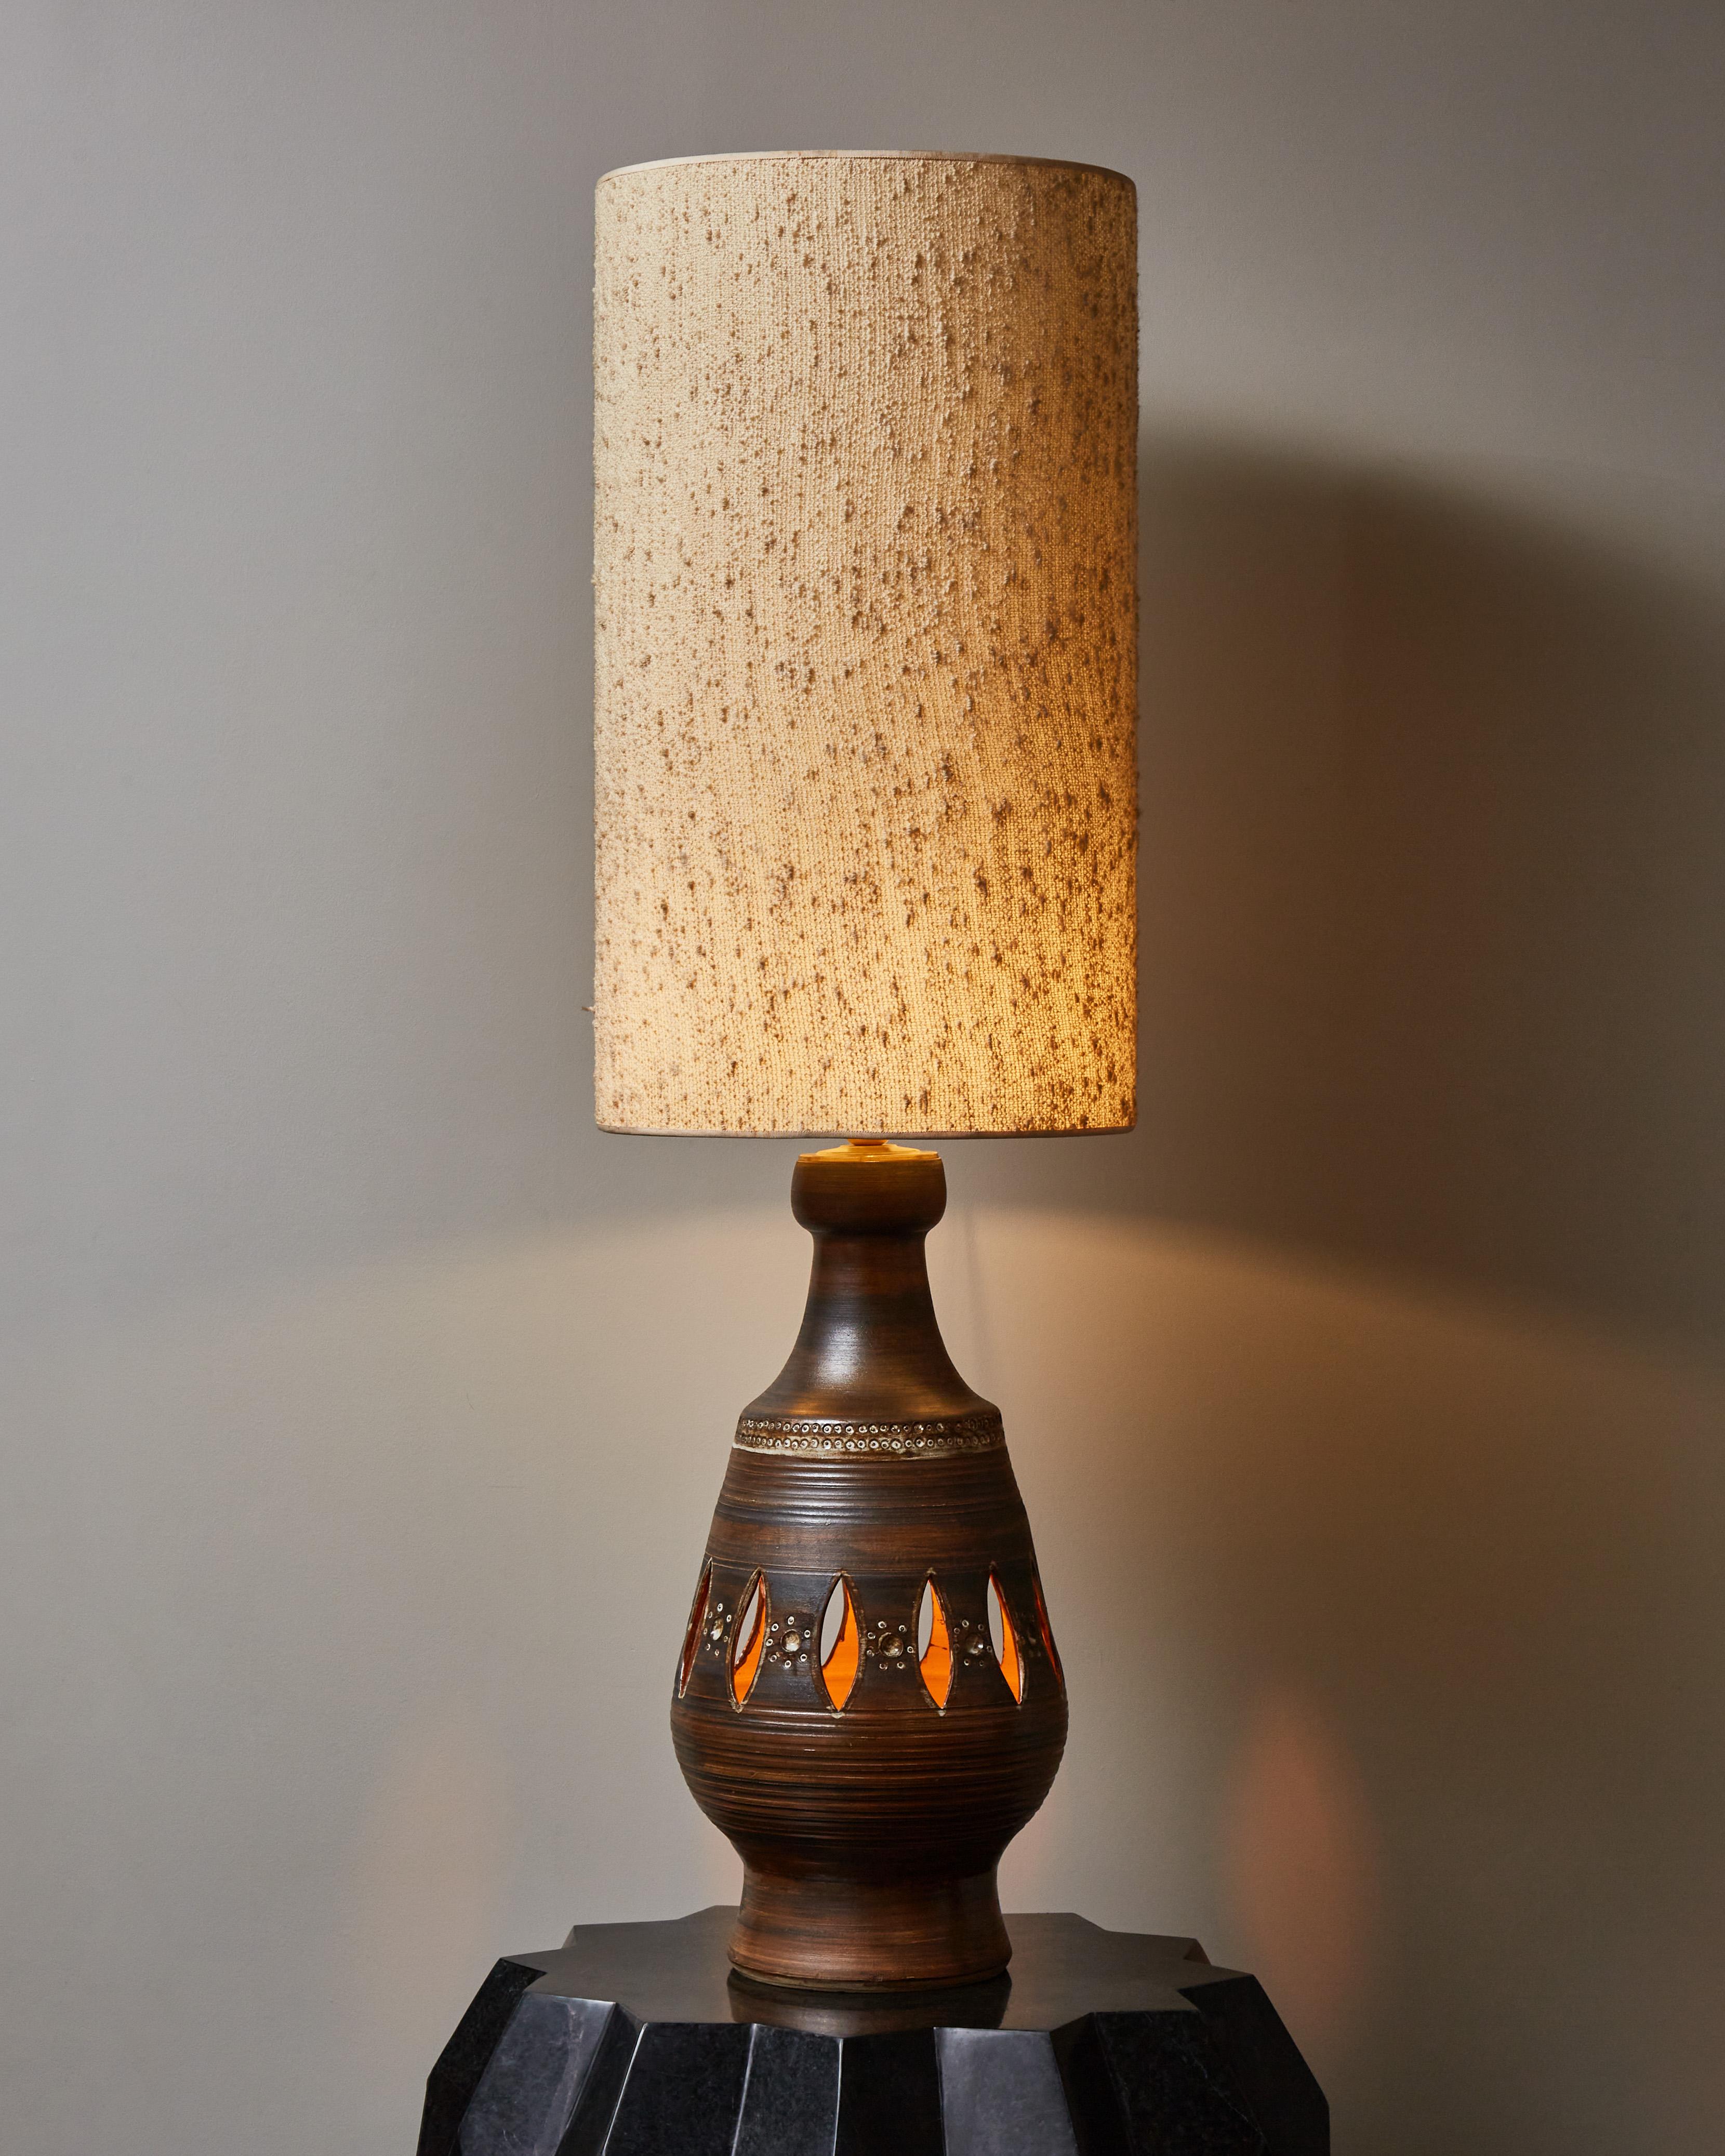 Imposing table lamp made in mat glazed ceramic with decors and openworks letting through the inner light.